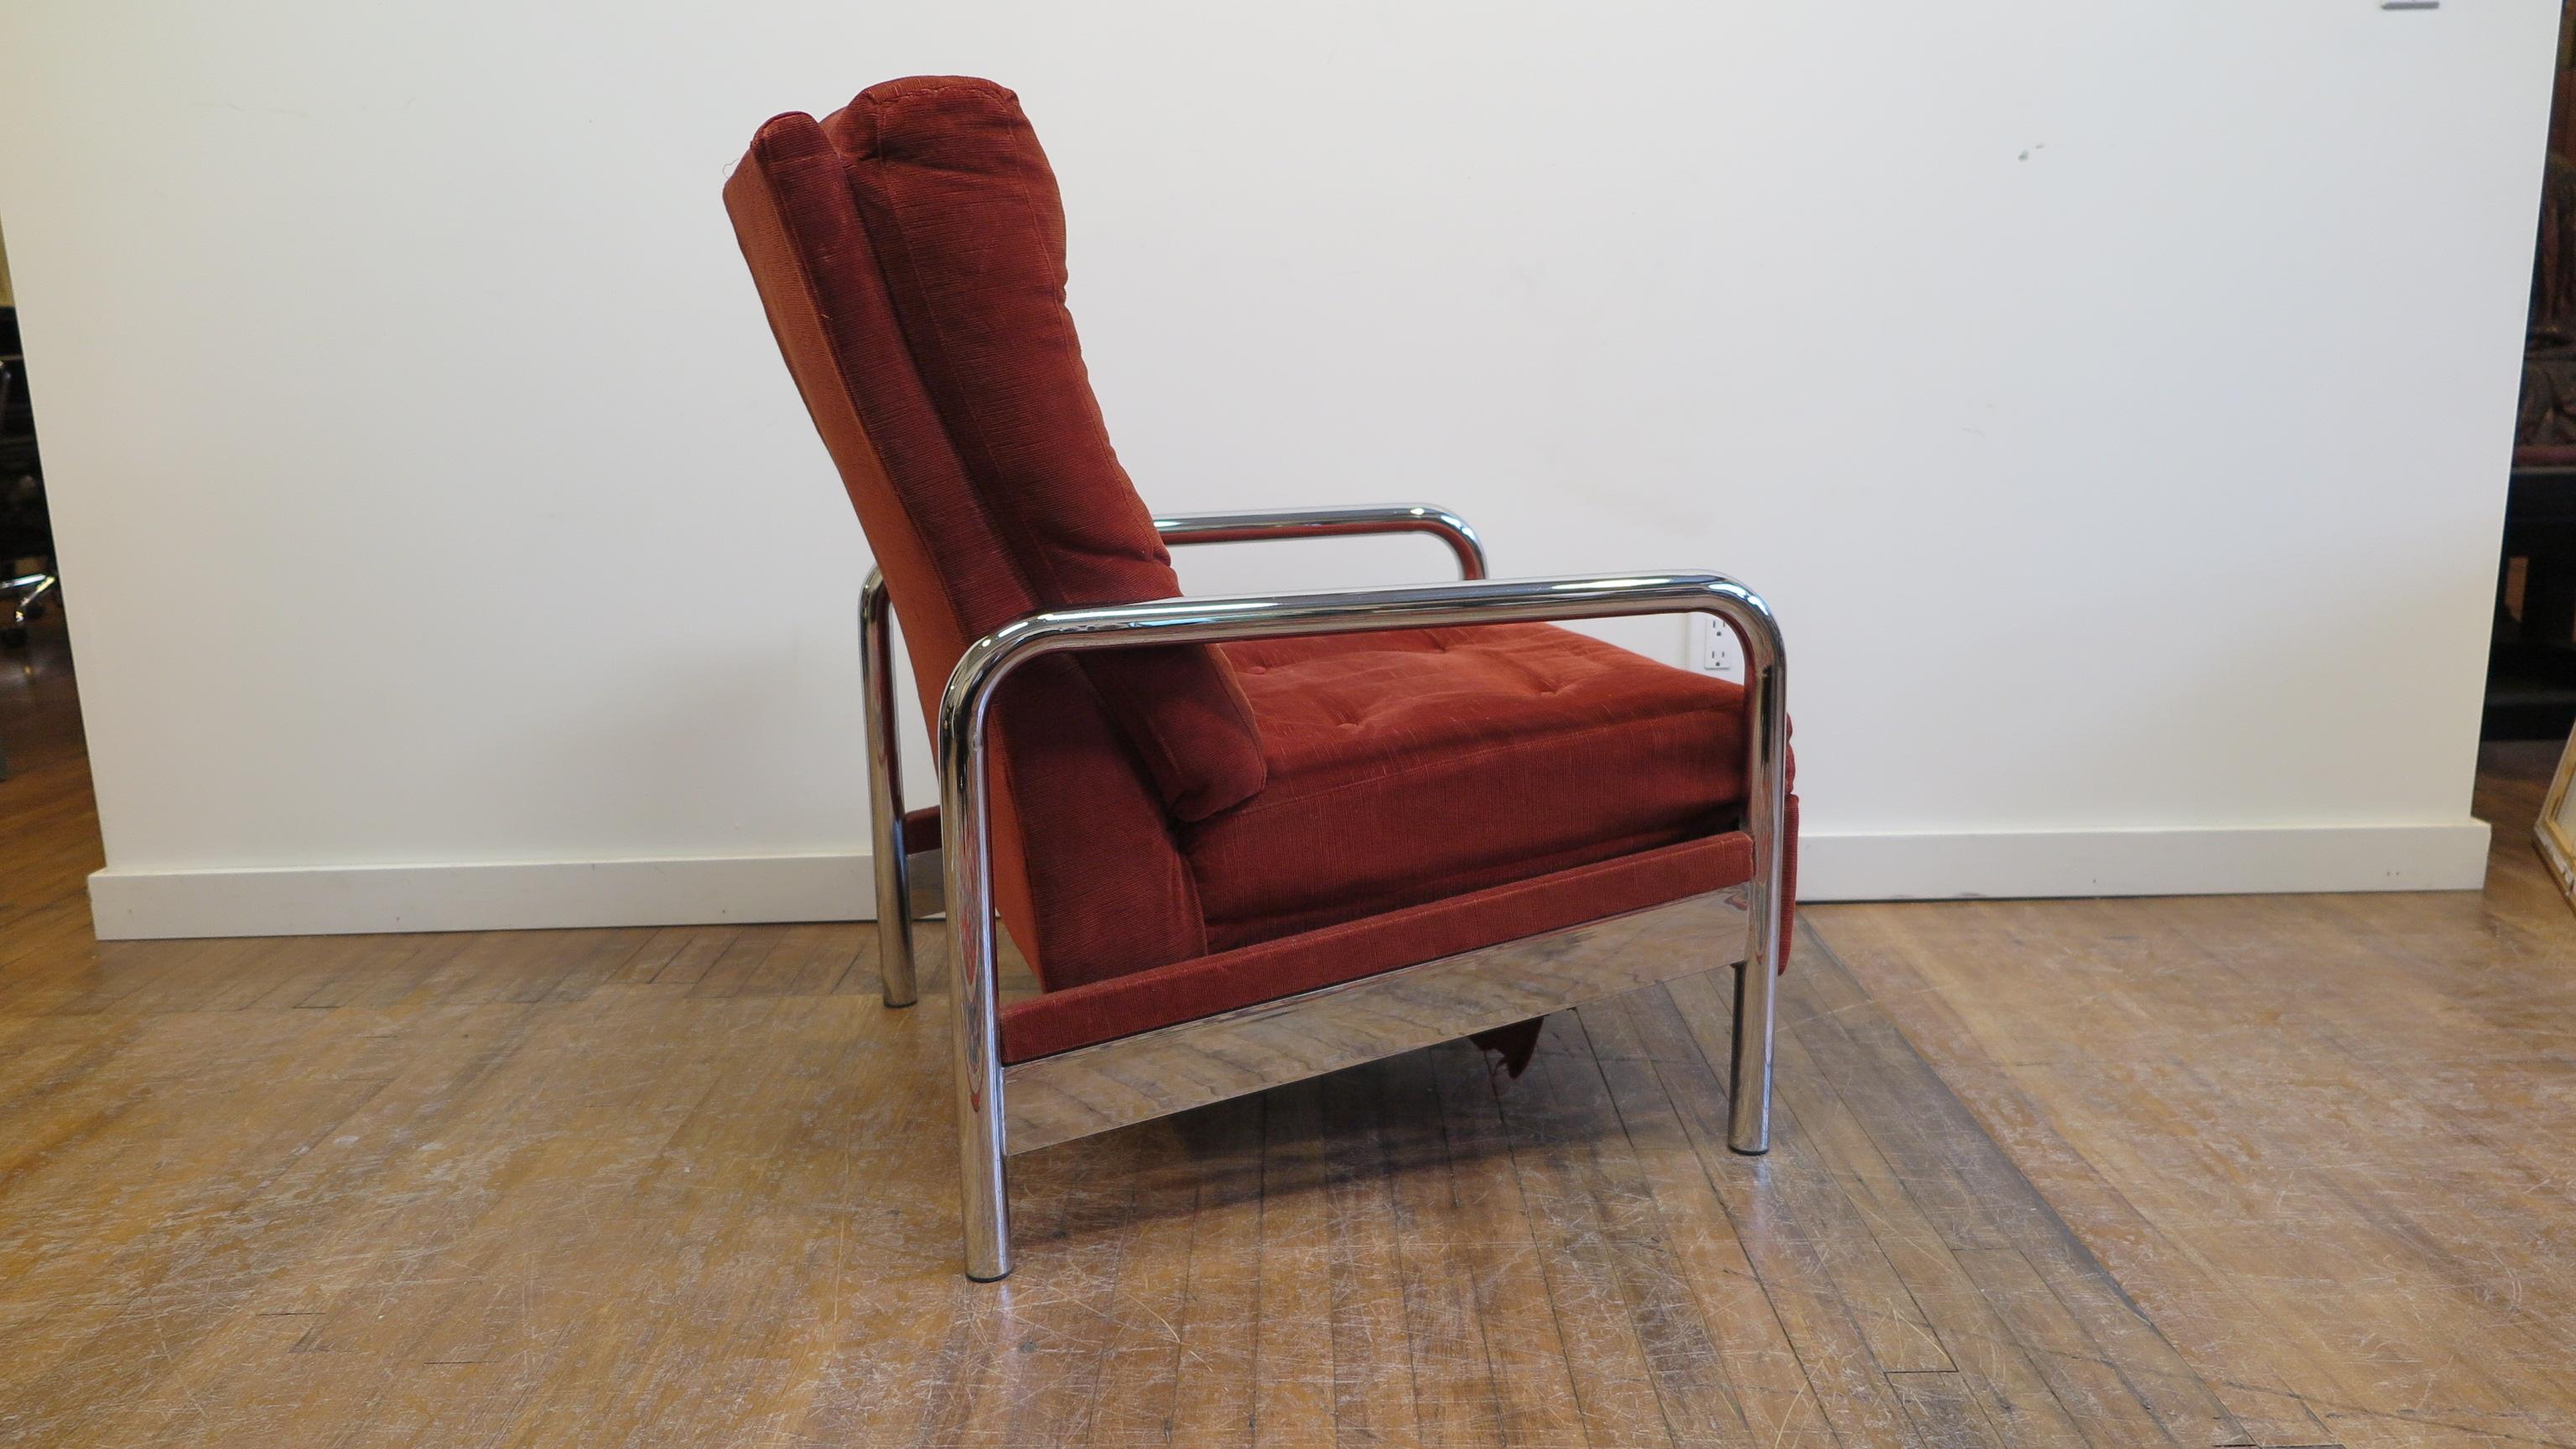 Milo Baughman reclining lounge chair. Chrome tubular frame in very good condition, upholstery is faded, new upholstery is recommended. Works great very comfortable. A great value make it your own with new upholstery. Upholstery service available for